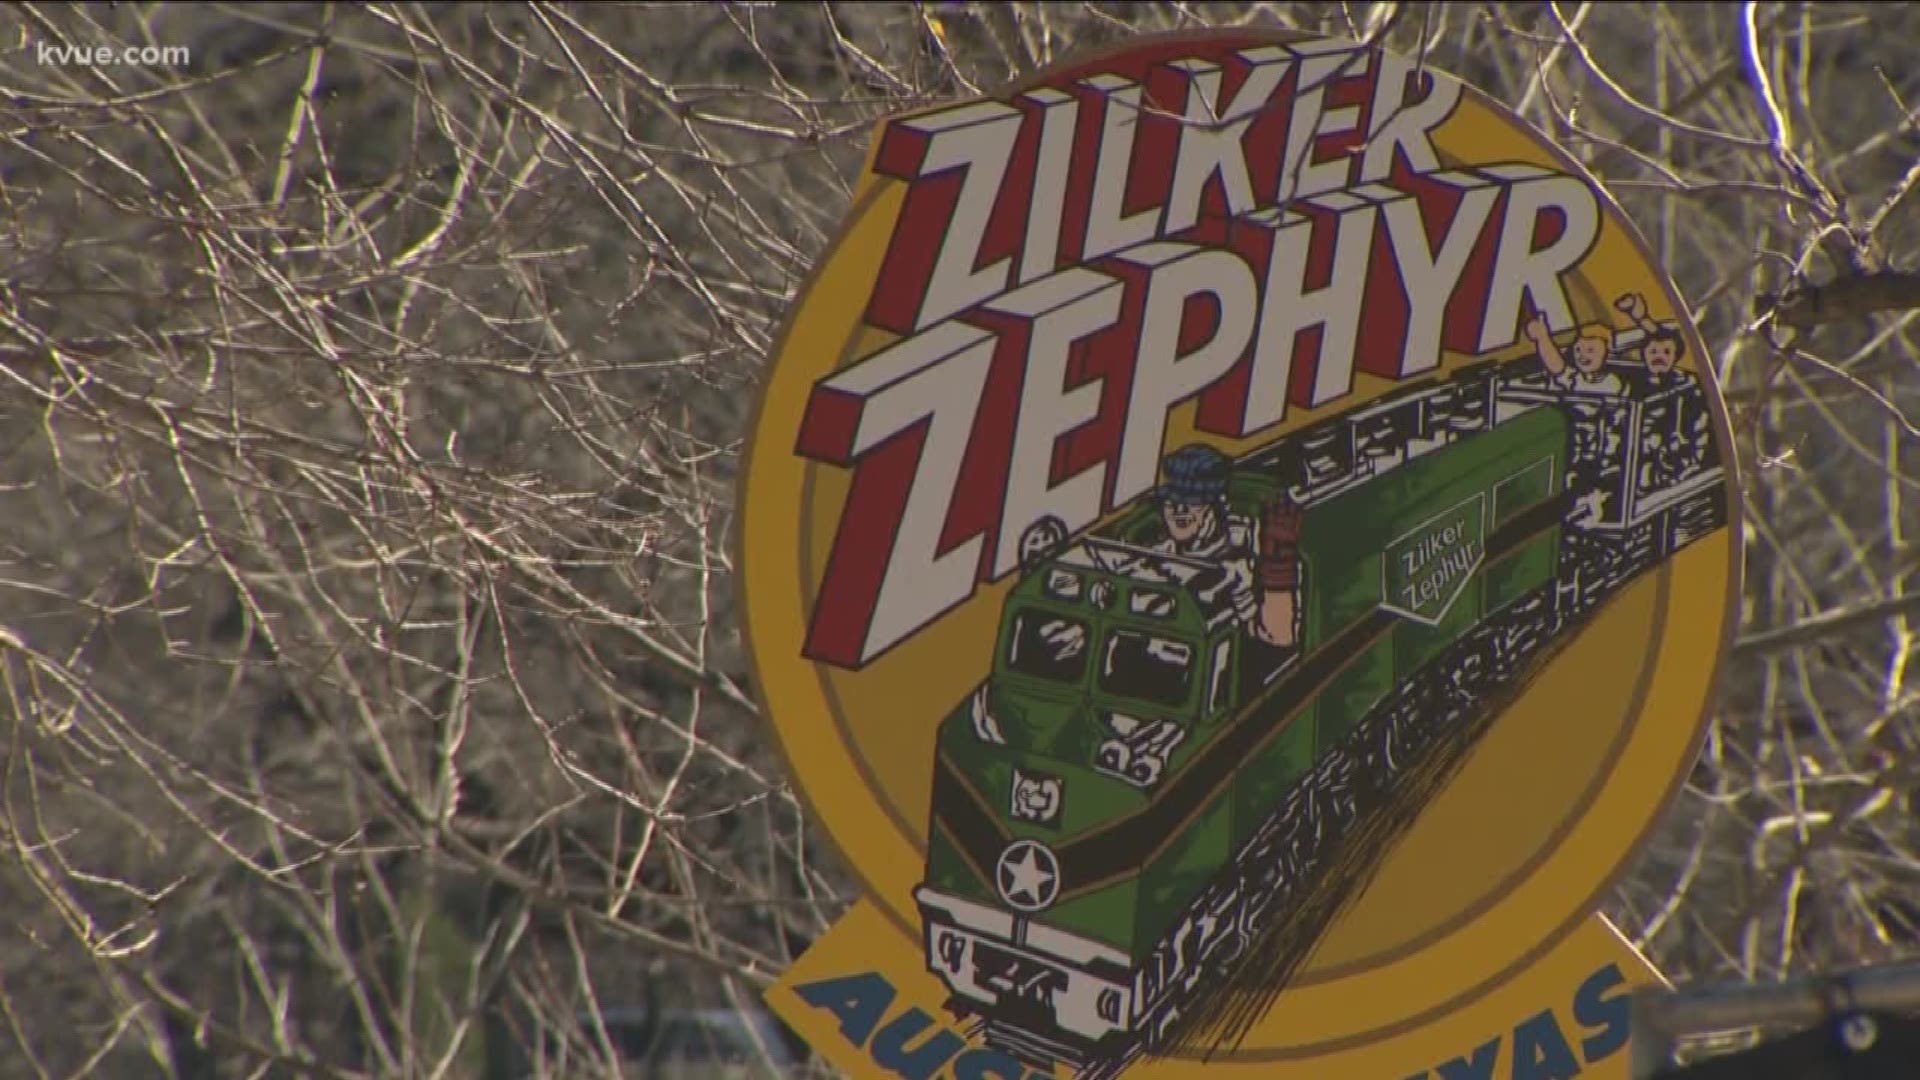 It's possible the Zilker Park train could continue operating in the future.